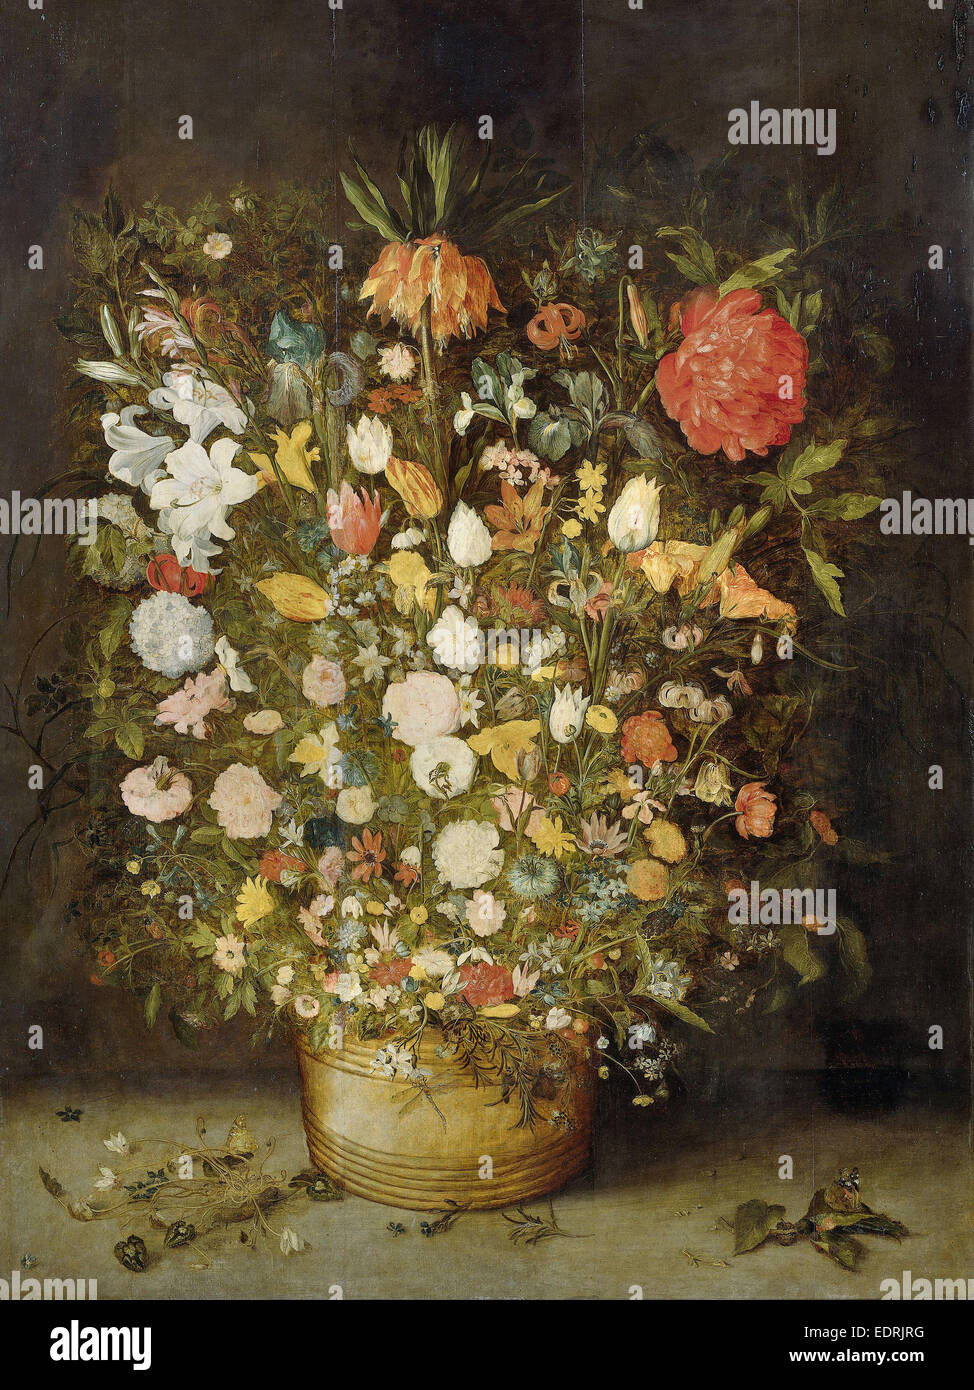 Jan Brueghel Flowers High Resolution Stock Photography and Images - Alamy